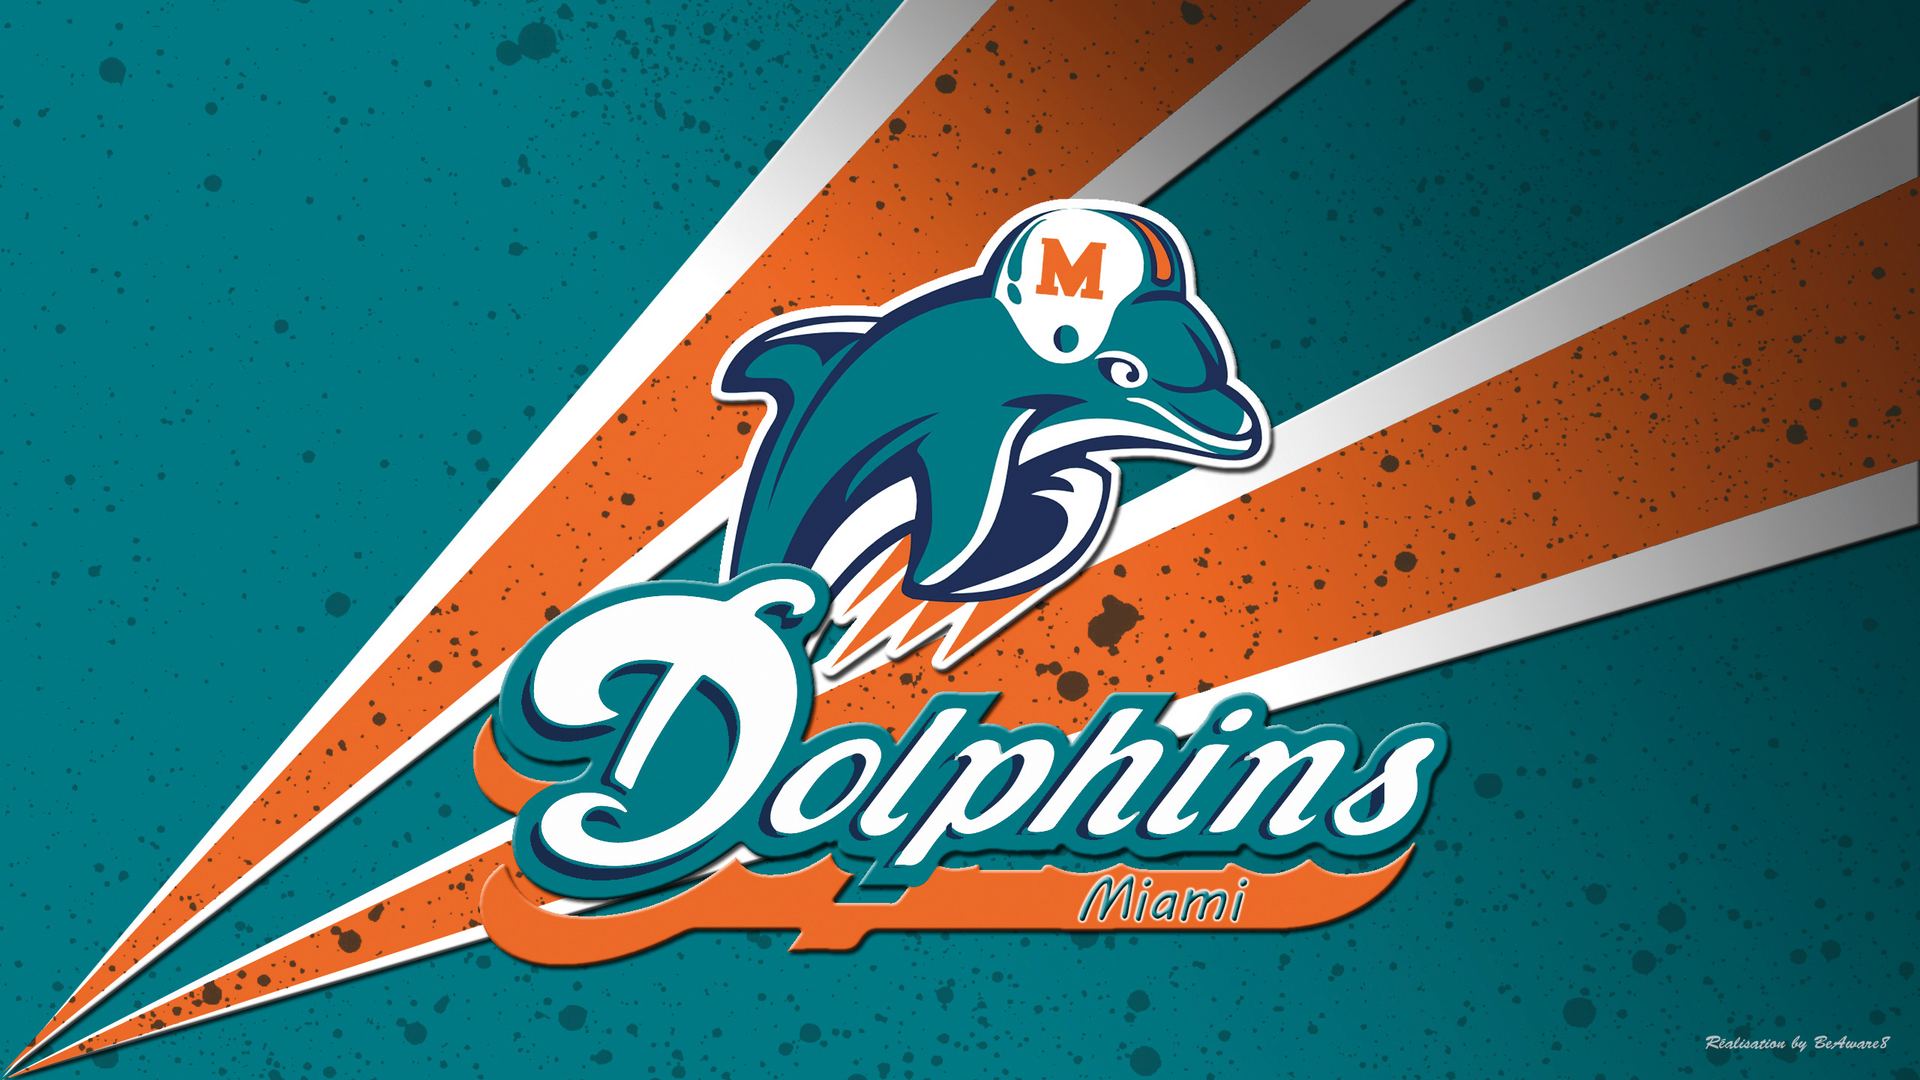 Miami Dolphins wallpaper hd free download